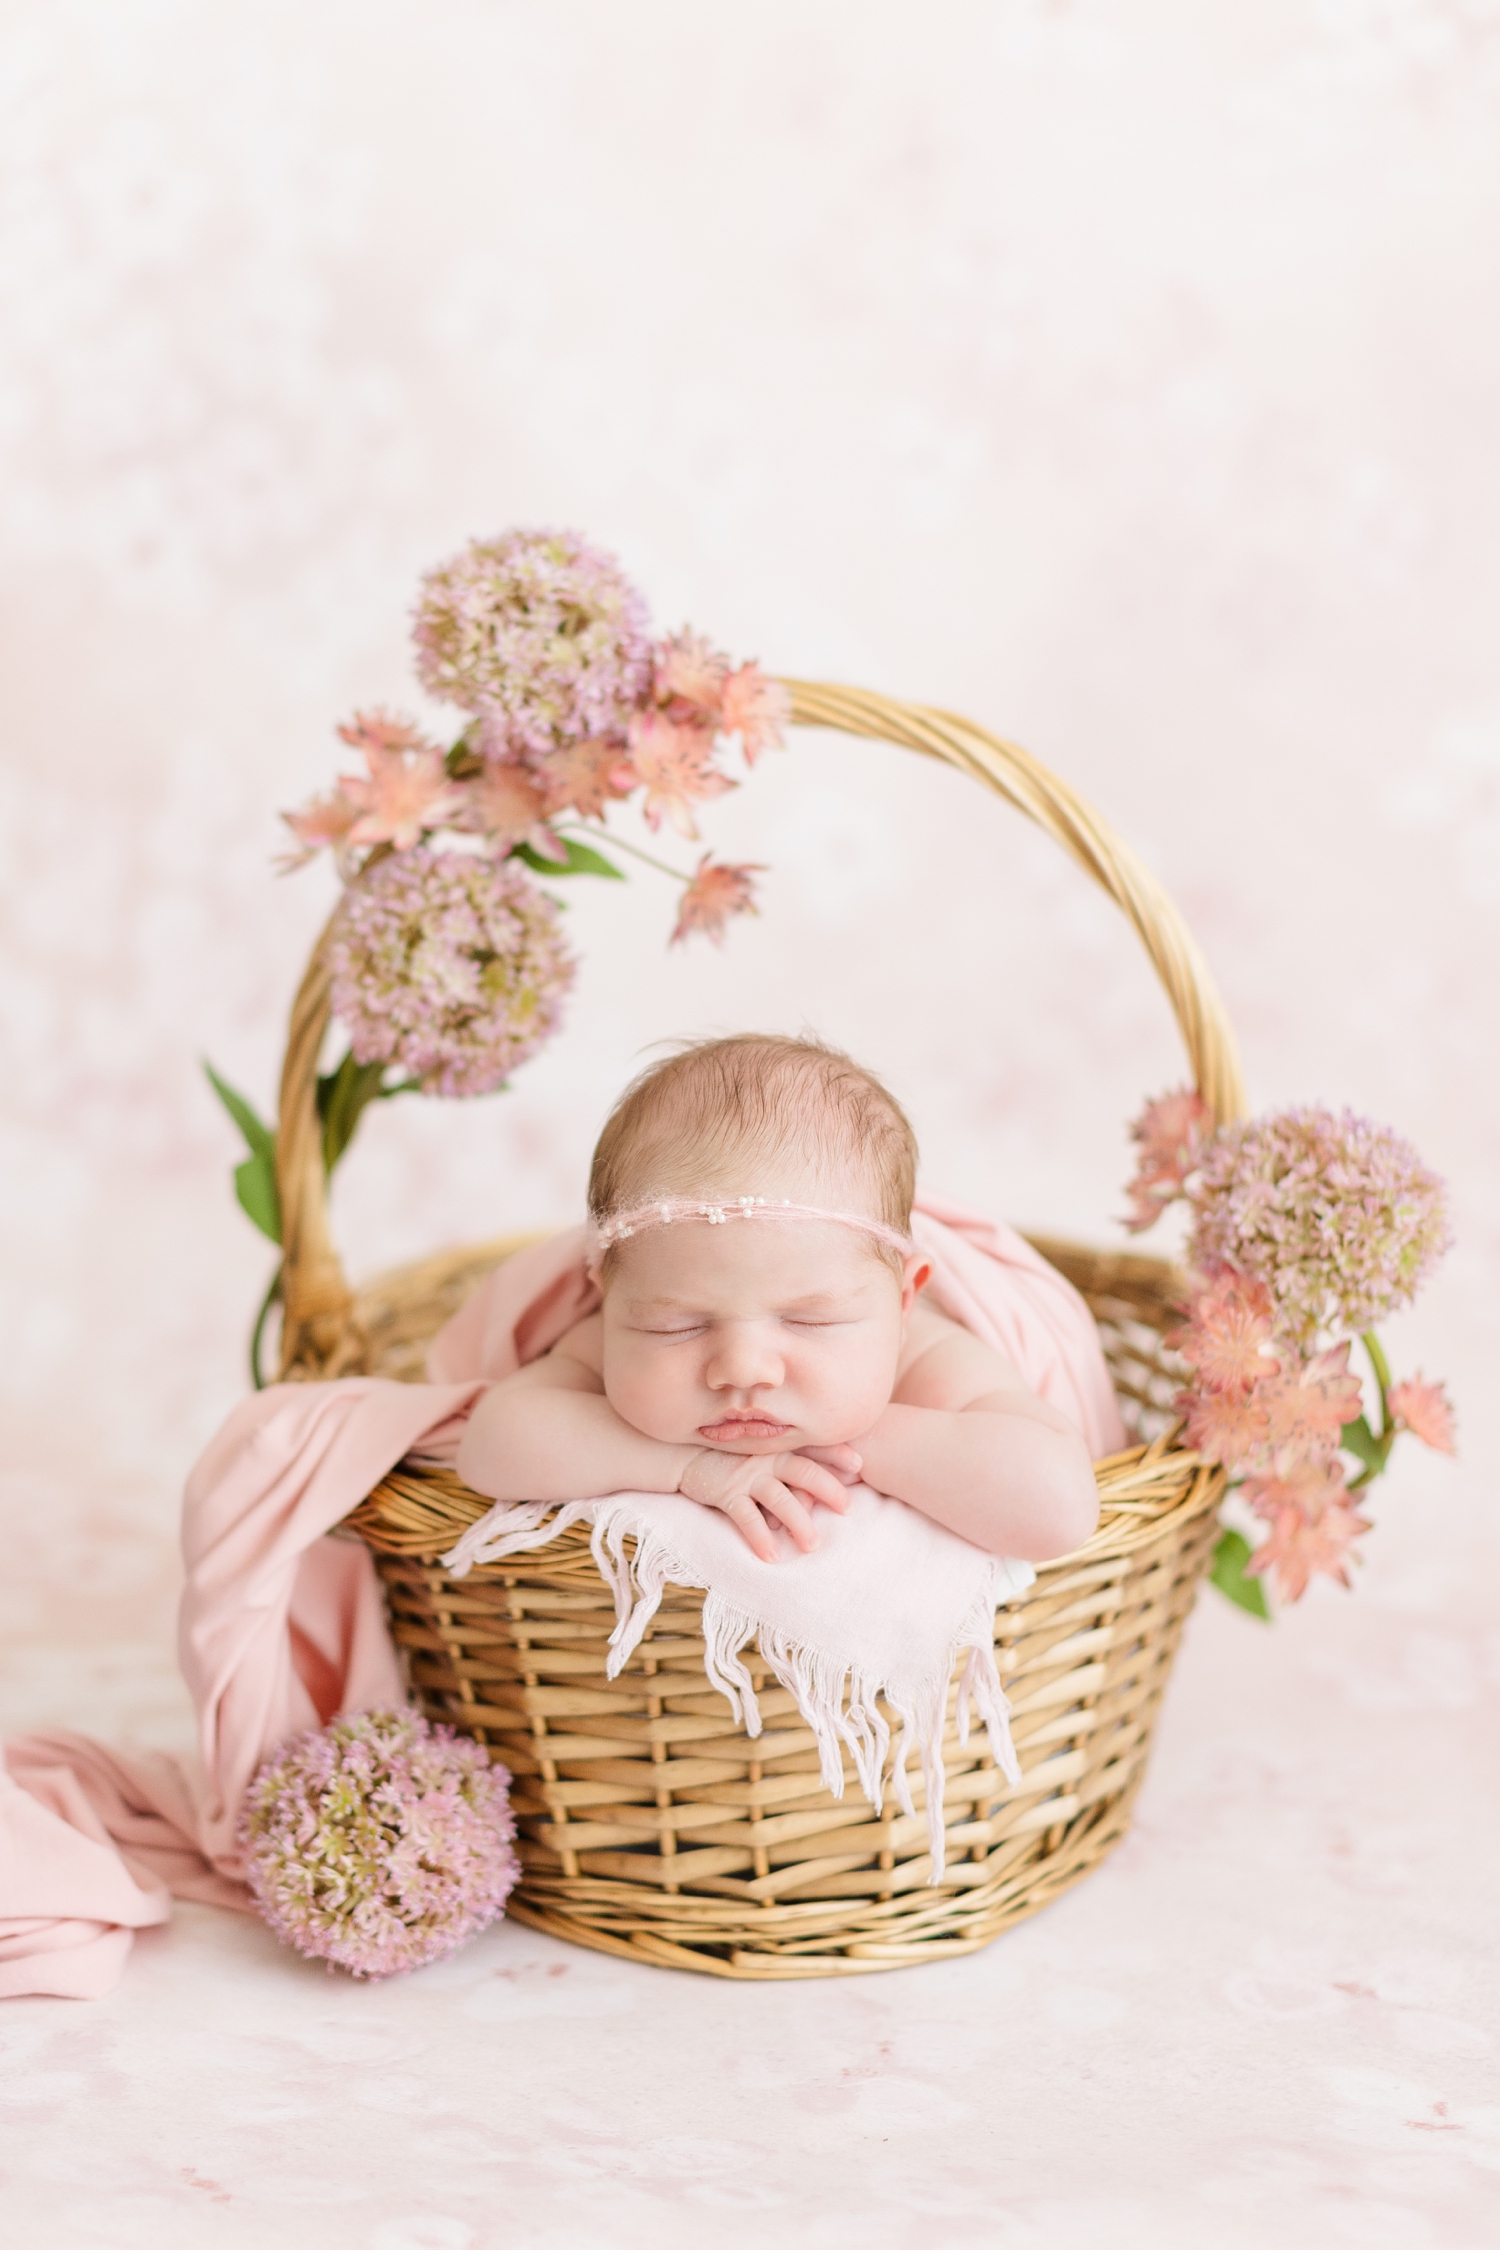 Baby Grace dressed in pink sleeps peacefully in a wicker basket surrounded by pink florals | CB Studio